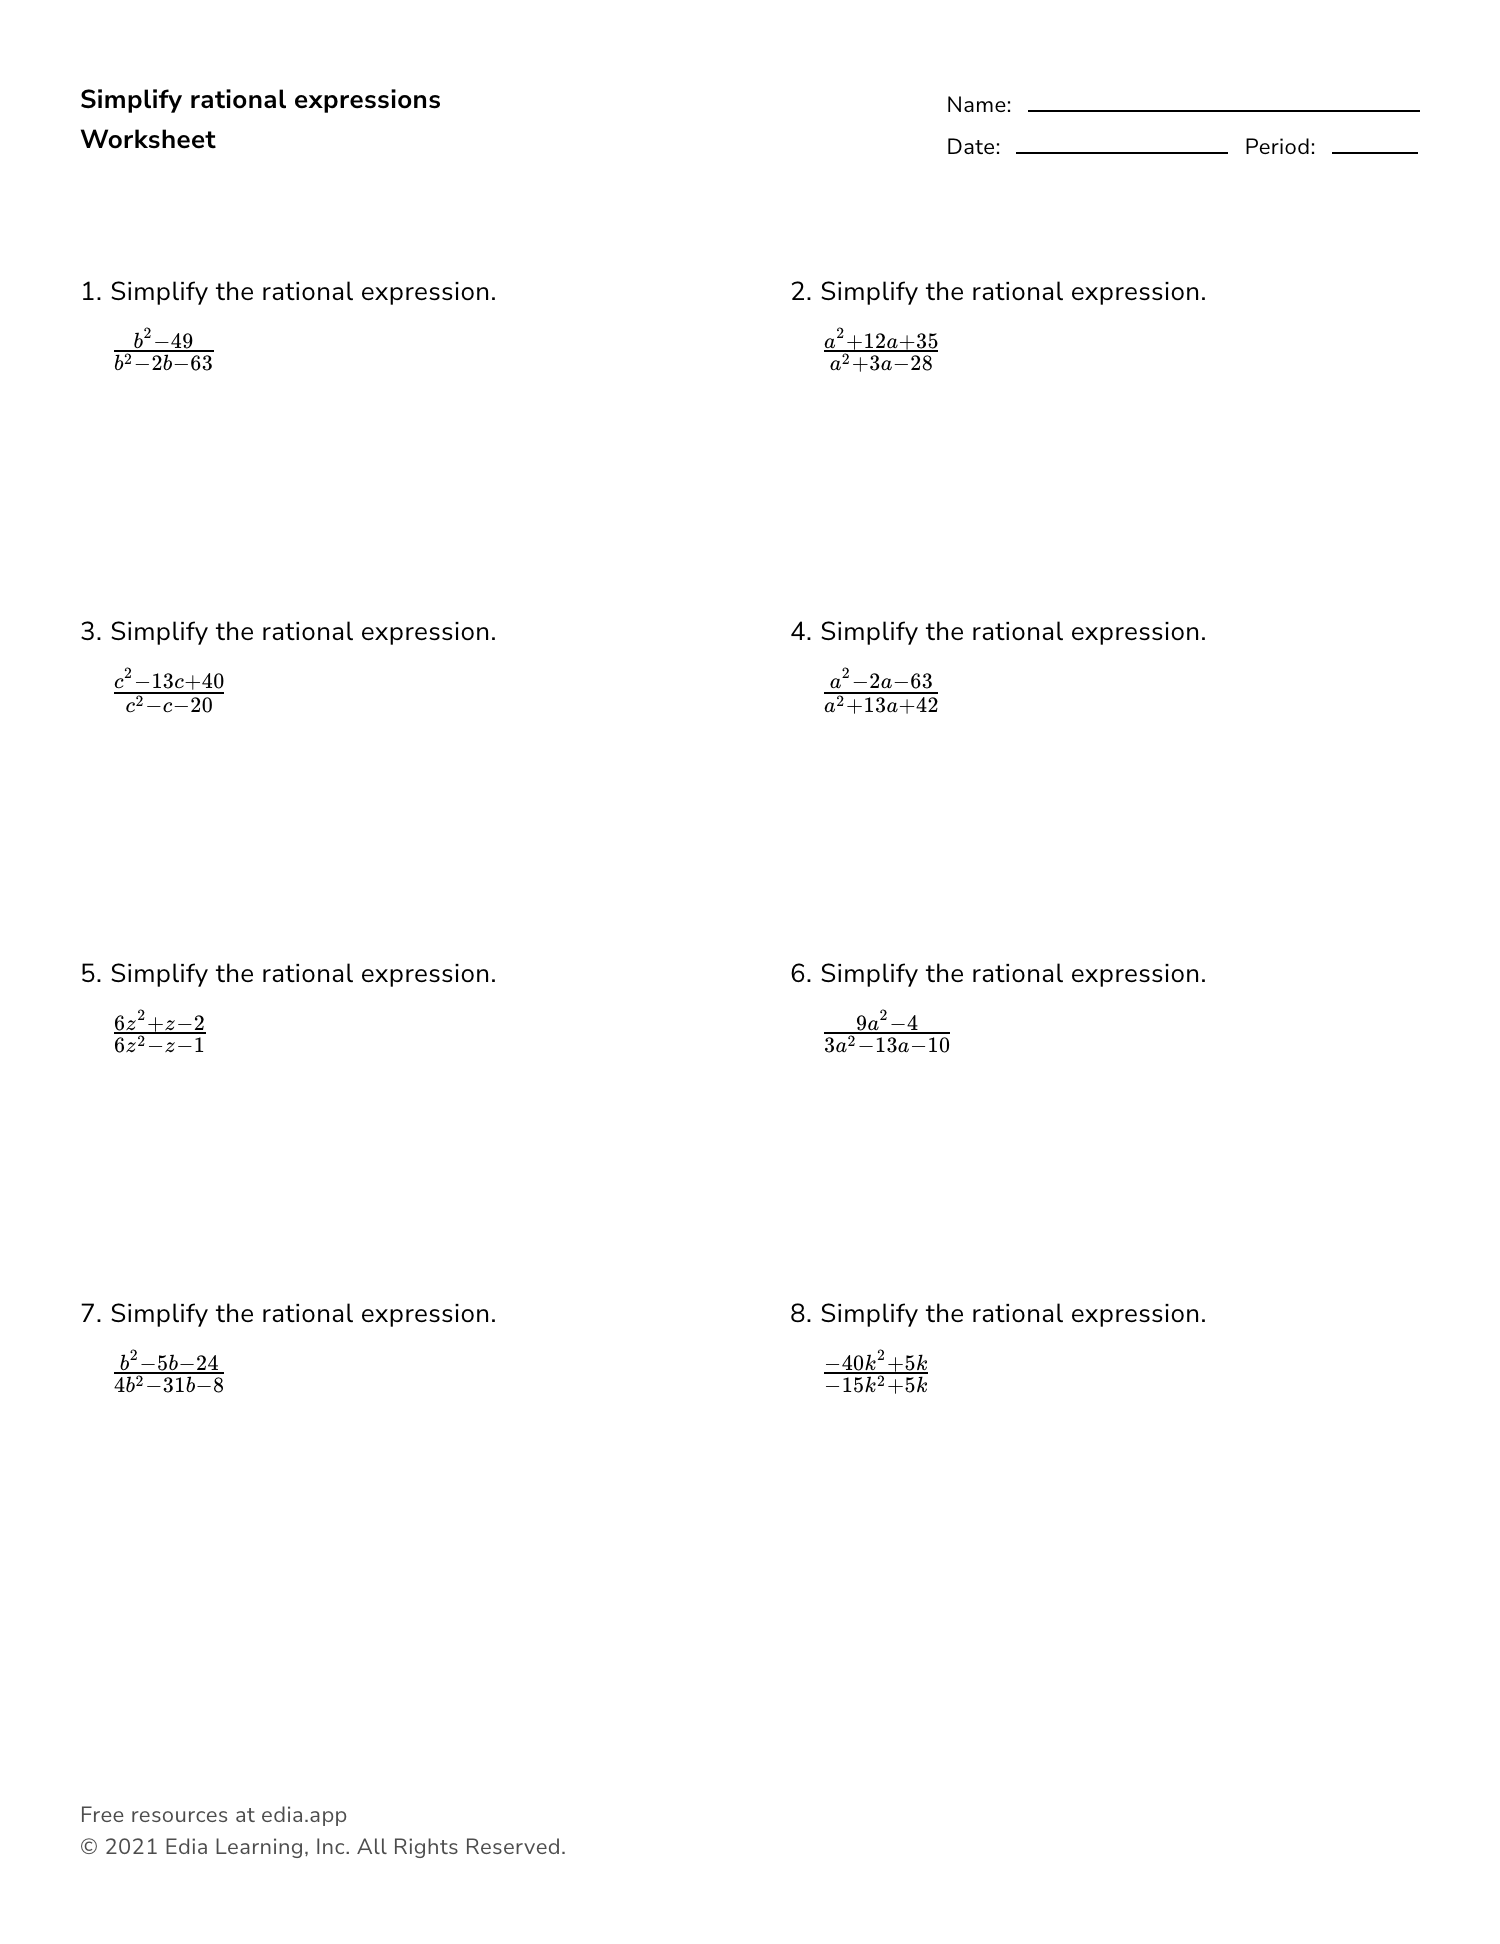 Simplify Rational Expressions - Worksheet Intended For Simplifying Rational Expressions Worksheet